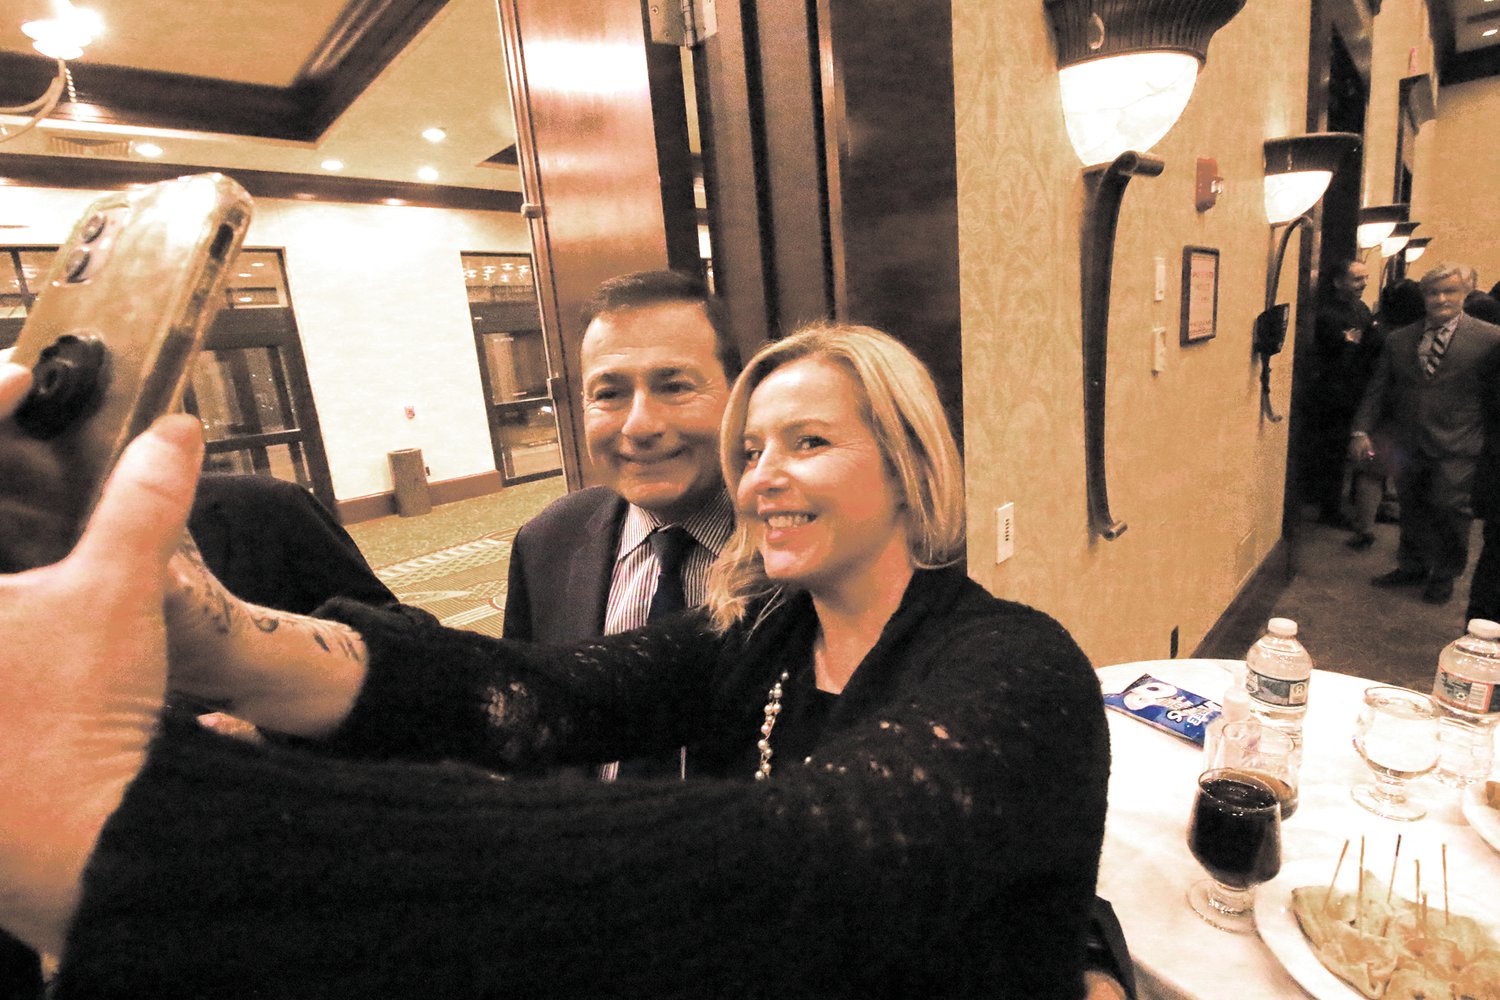 MOMENT TO REMEMBER: As visitors cued up to greet House Speaker K. Joseph Shekarchi at his fundraiser Tuesday night at the Crowne Plaza, a woman jumped the line to take a selfie with the Warwick legislator. She melted into the crowd of more than 500 before we had the chance to get her name. And Shekarchi didn’t know who she was either.